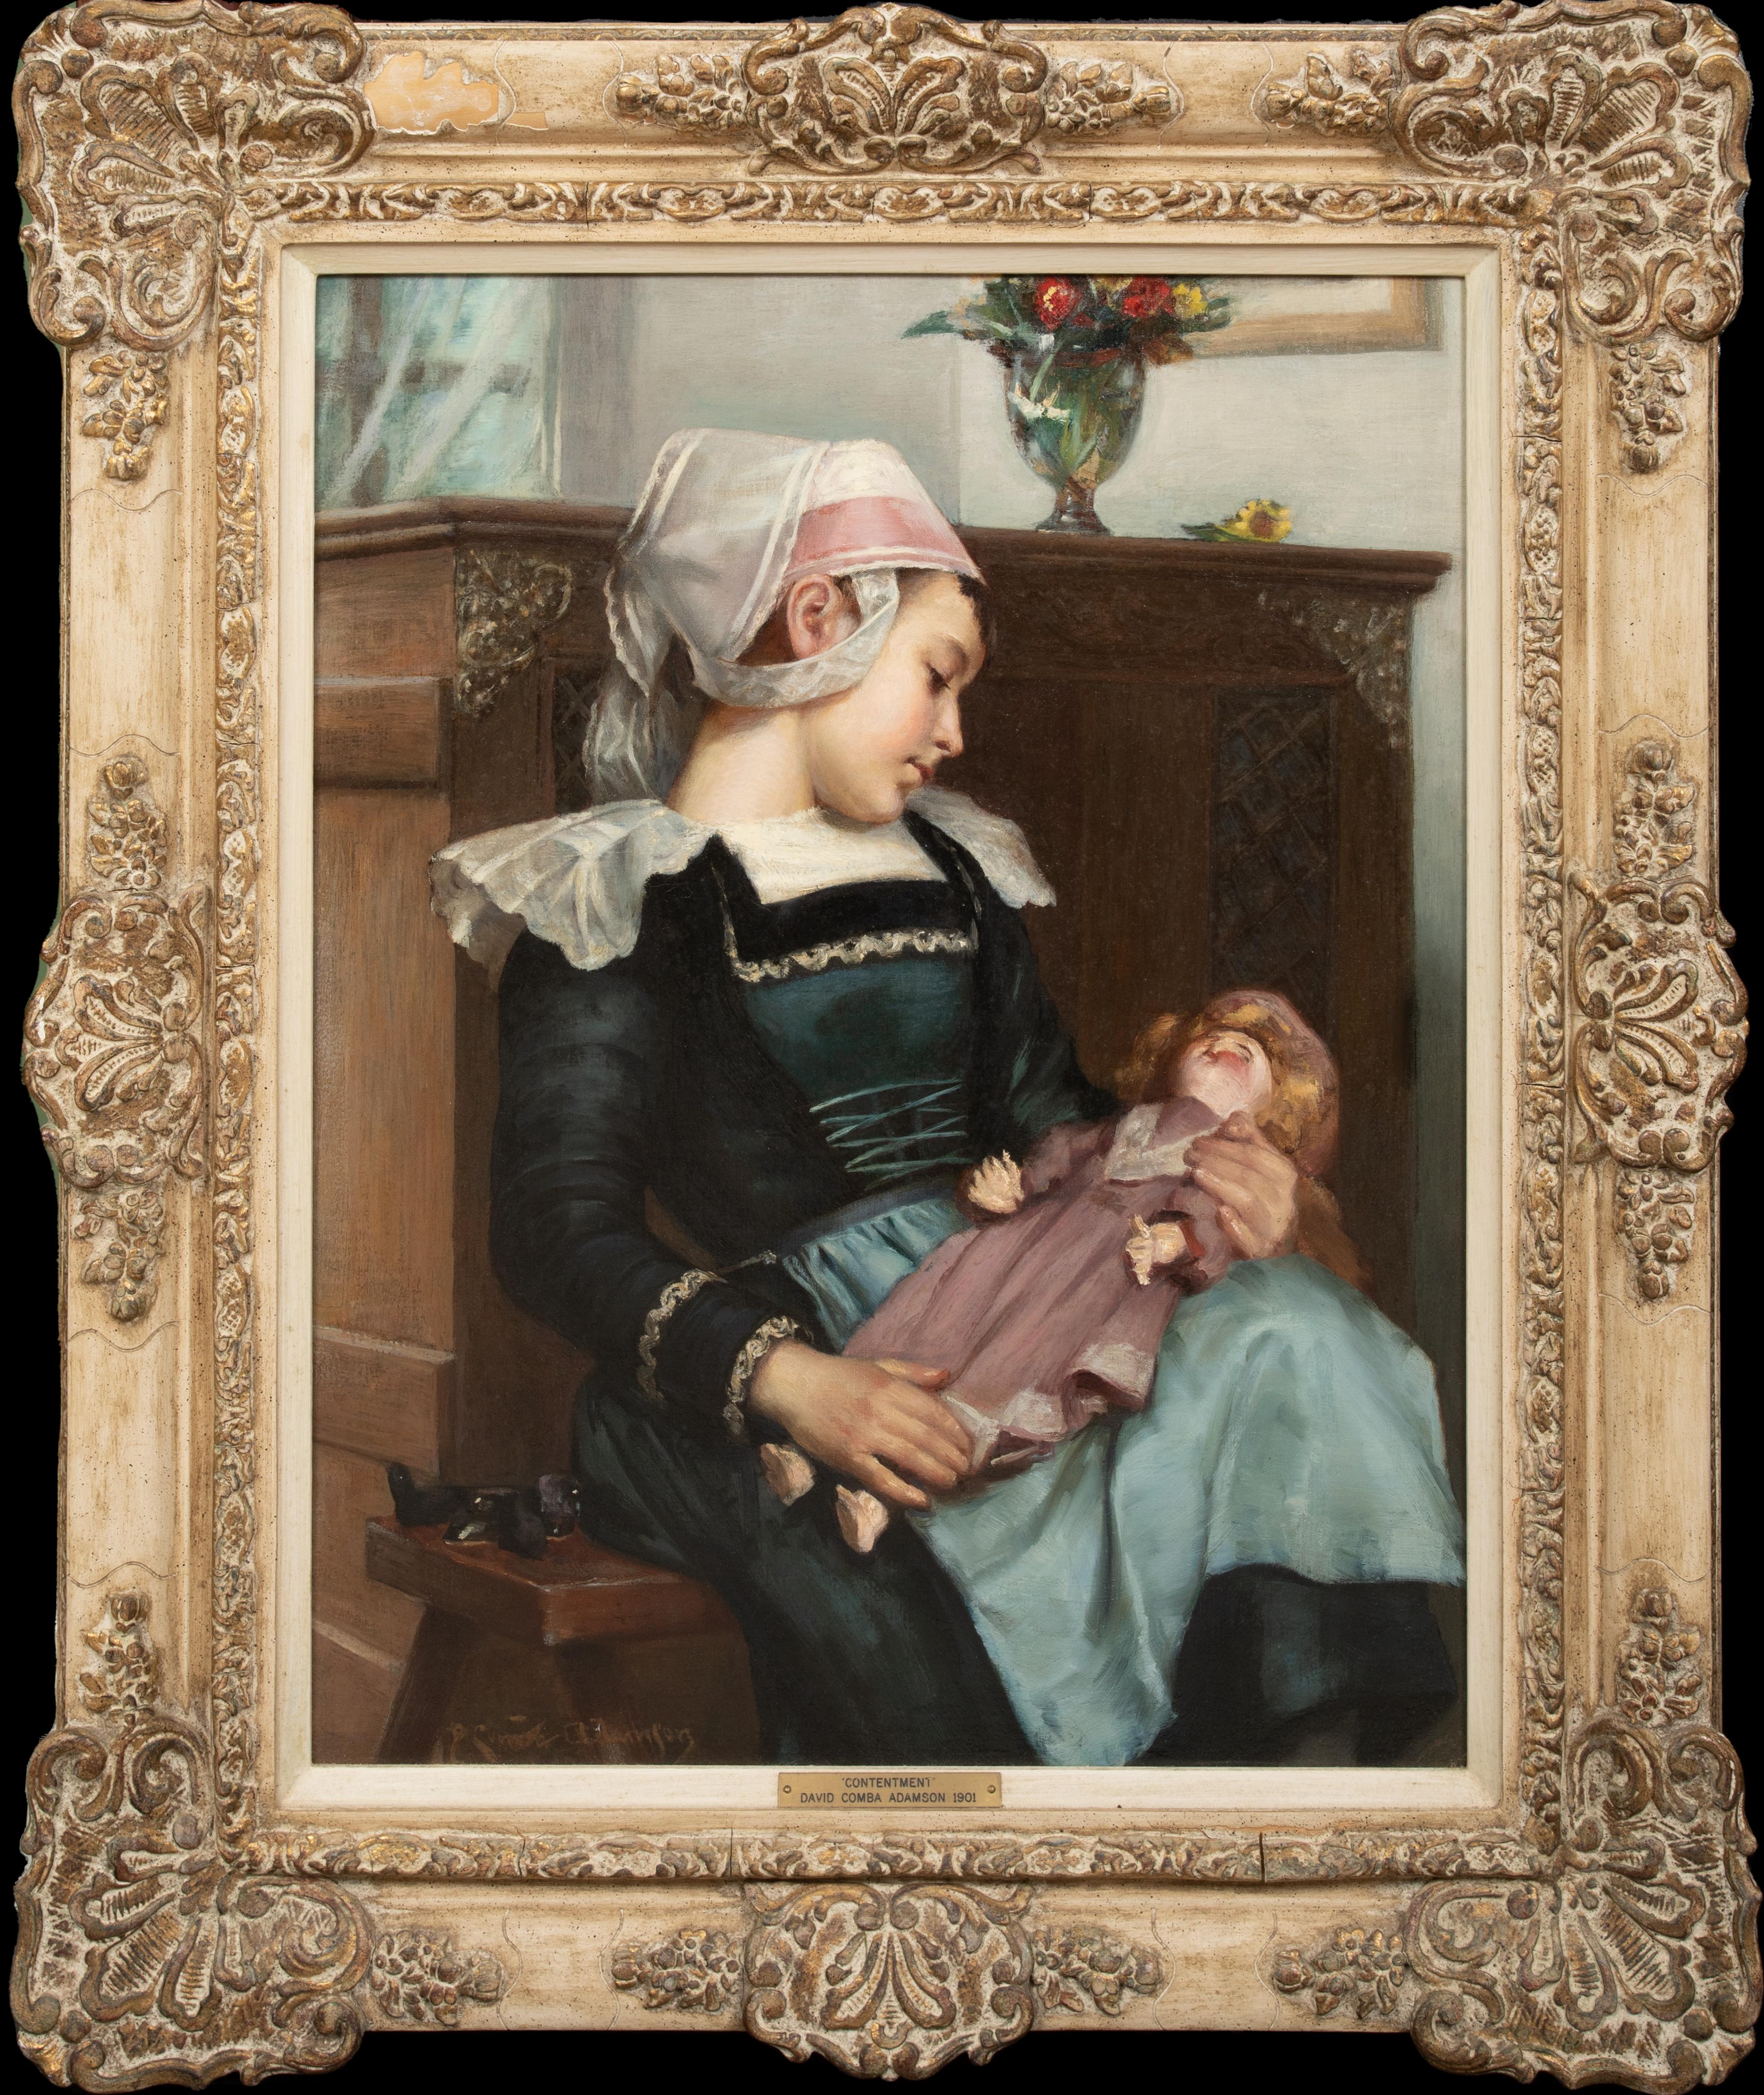 Her Favorite, 19th Century

David Comba Adamson (1559-1926) similar works to $14,000

Exhibited
Dundee, Dundee Fine Art Exhibition.

Large 19th Century portrait of a young Breton girl holding her favorite doll, oil on canvas by David Adamson.